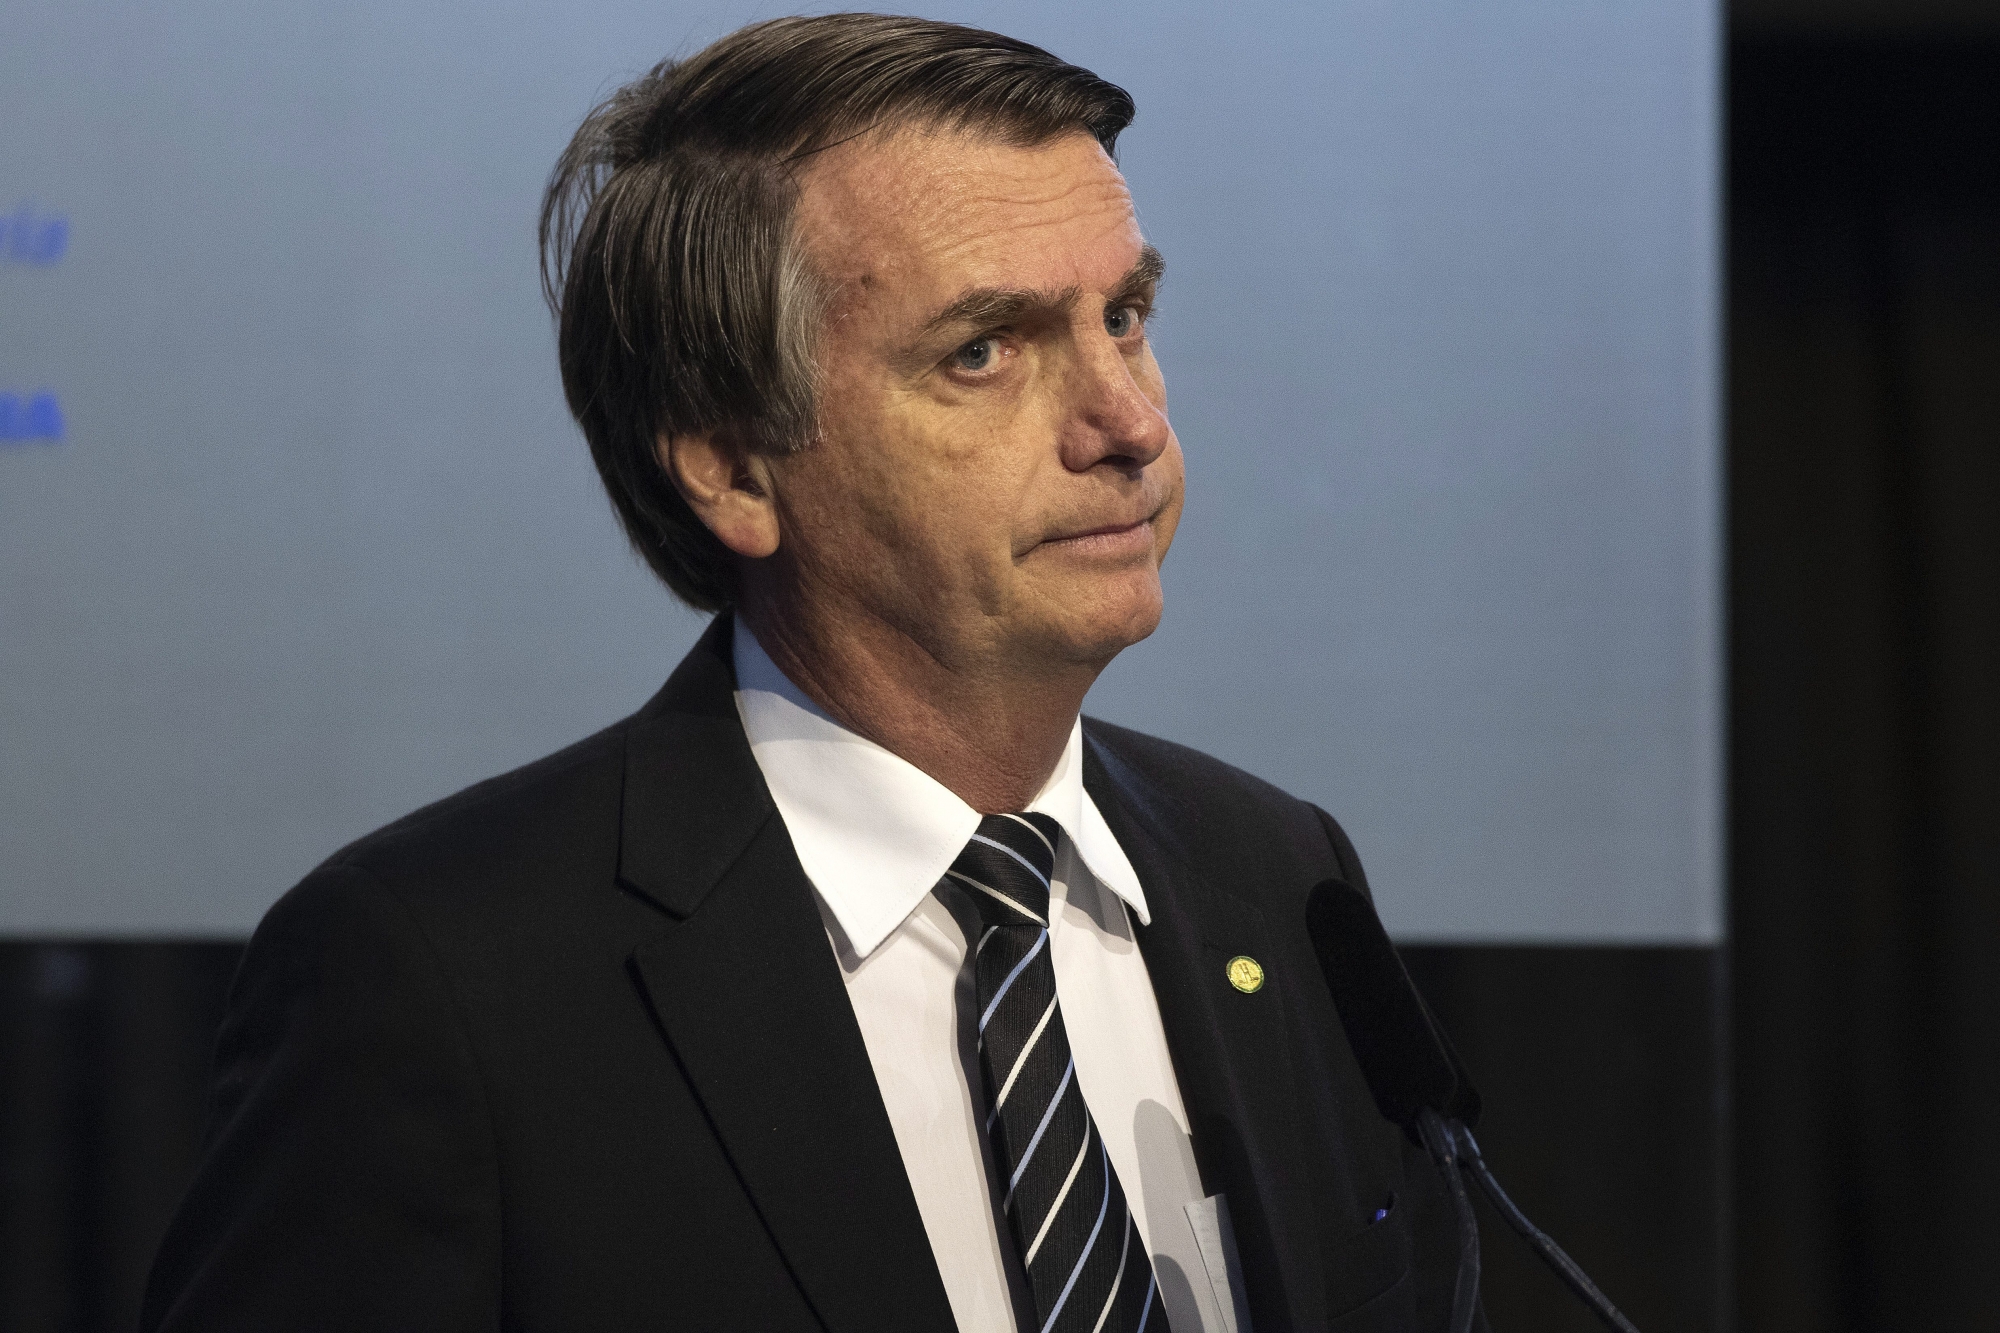 epa06864331 The far-right Jair Bolsonaro, who leads by narrow margin the polls for next October's elections in Brazil, participates in a business meeting organized by the National Confederation of Industry (CNI), in Brasilia, Brazil, 04 July 2018. Six of the leading candidates for the Presidency of Brazil appear today before a business forum, ahead of the general elections in October 2018.  EPA/Joédson Alves BRAZIL ELECTIONS